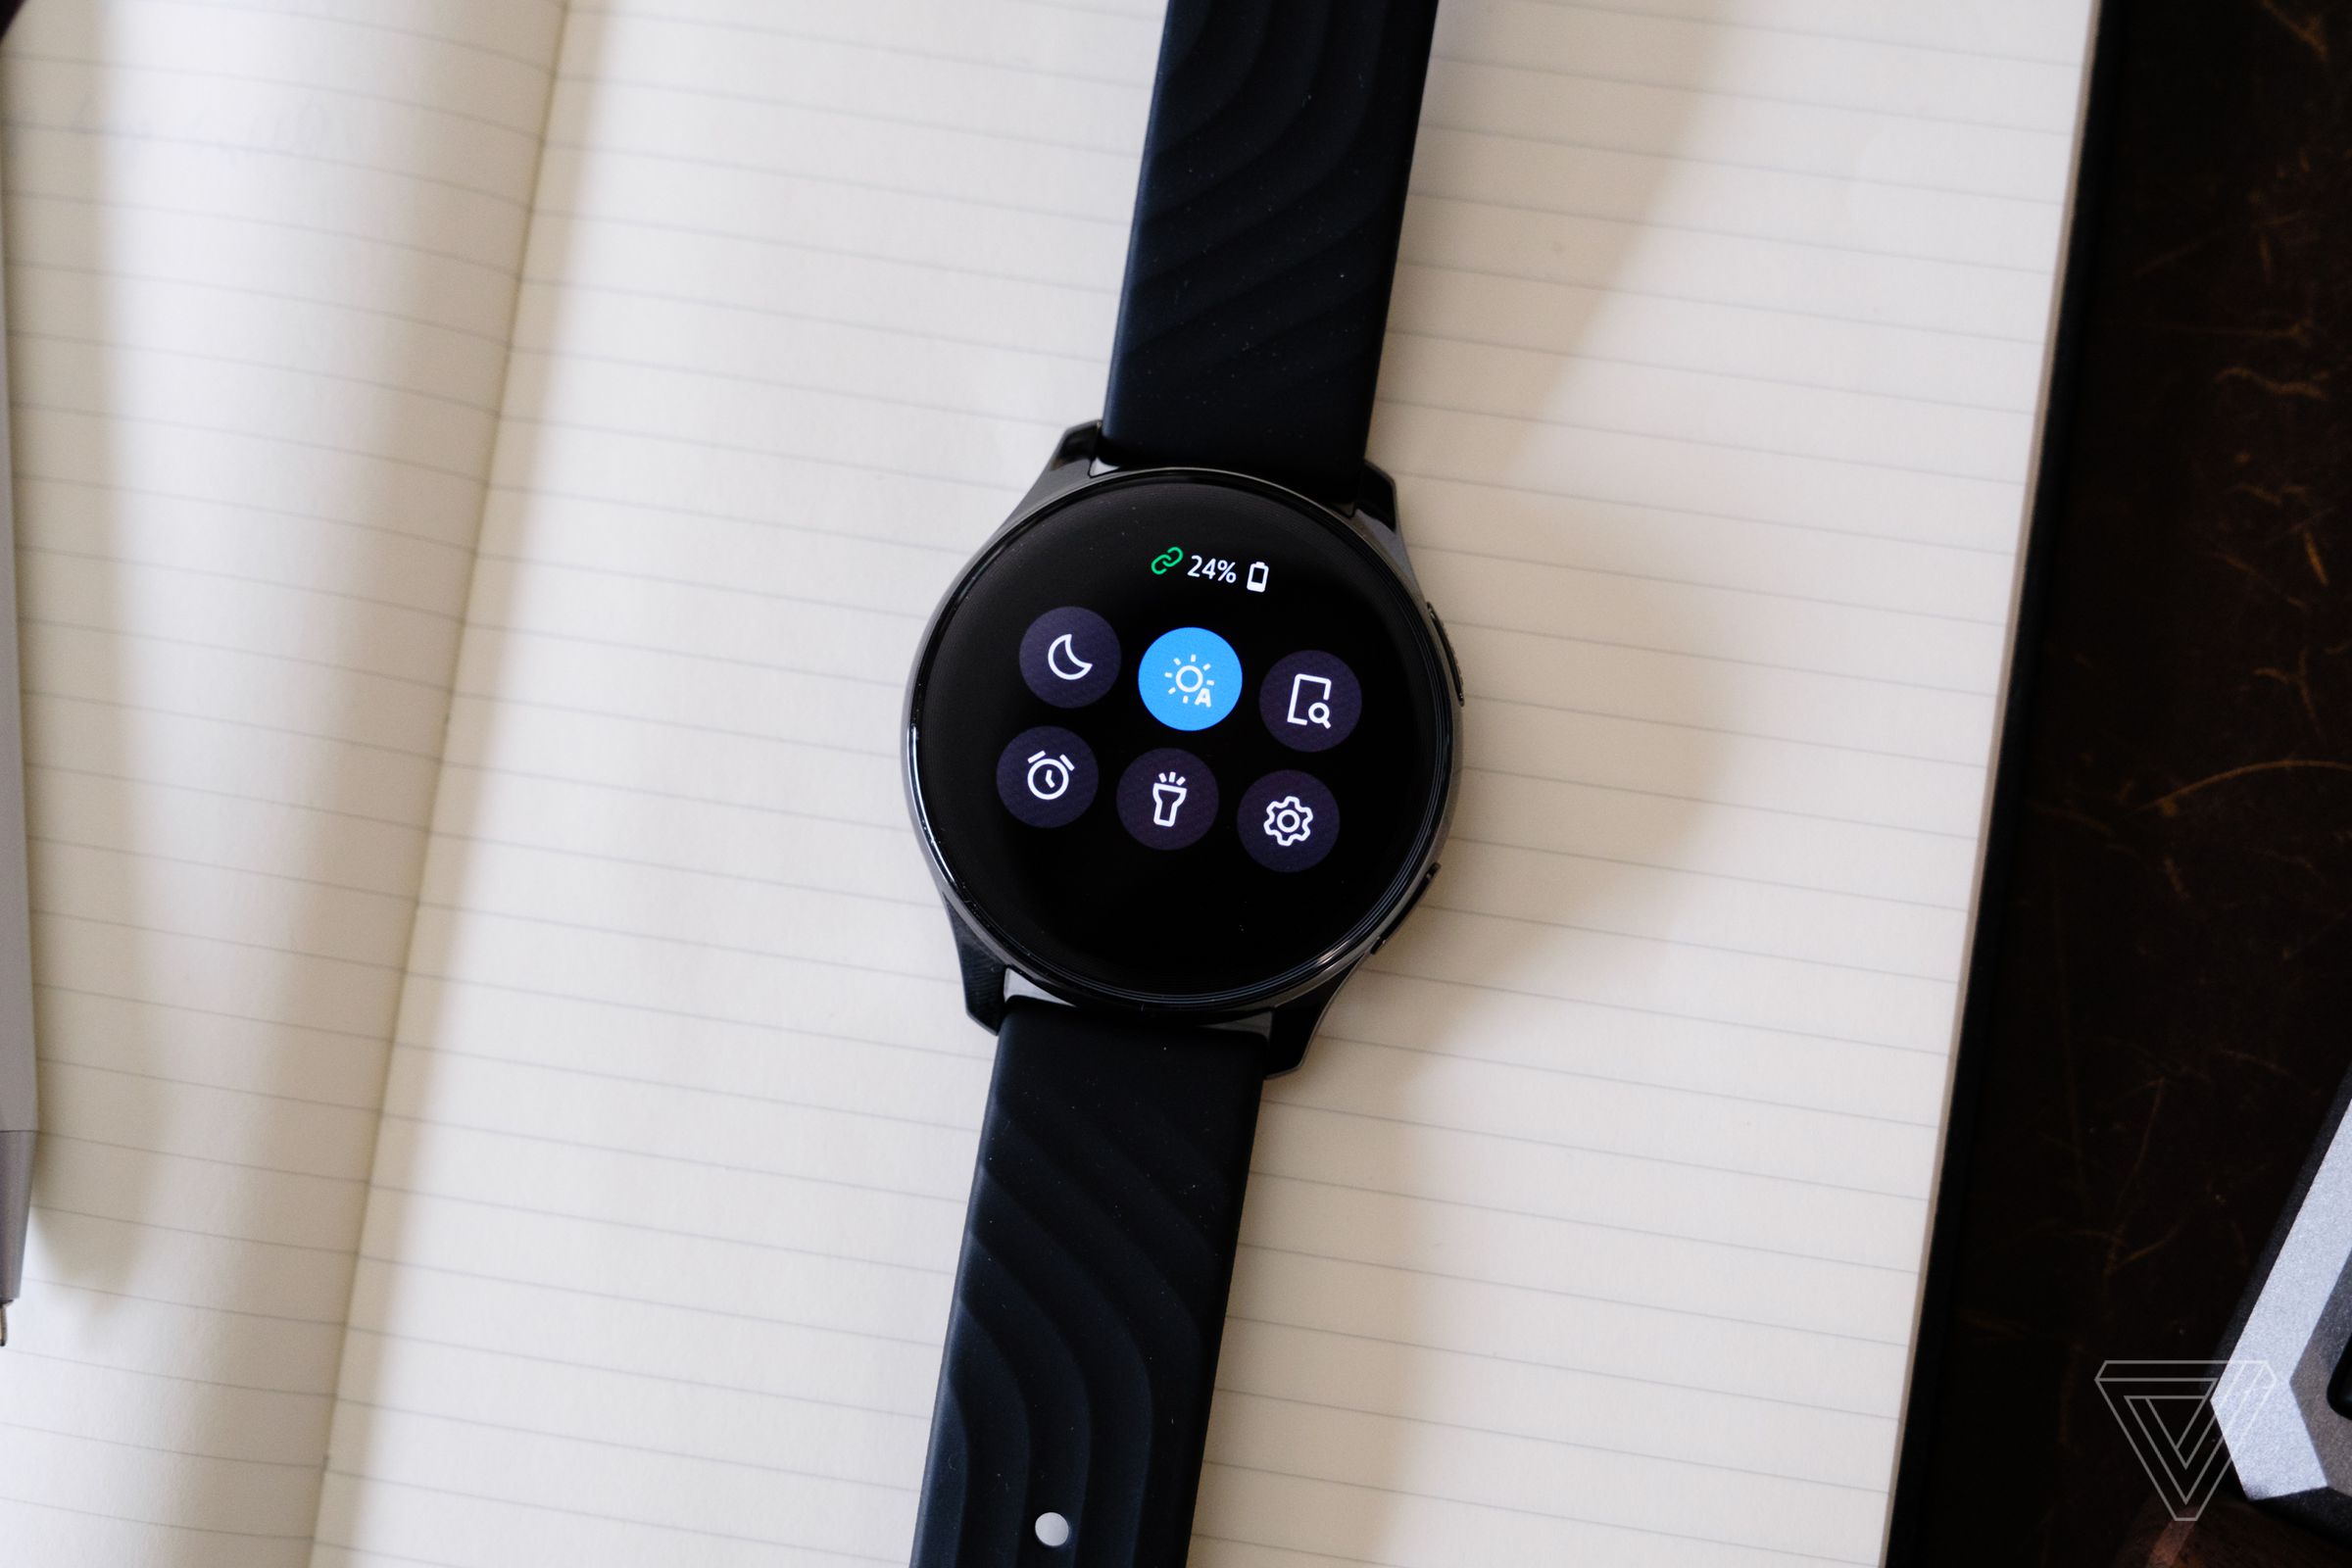 The OnePlus Watch’s interface mimics Wear OS and is easy to navigate.